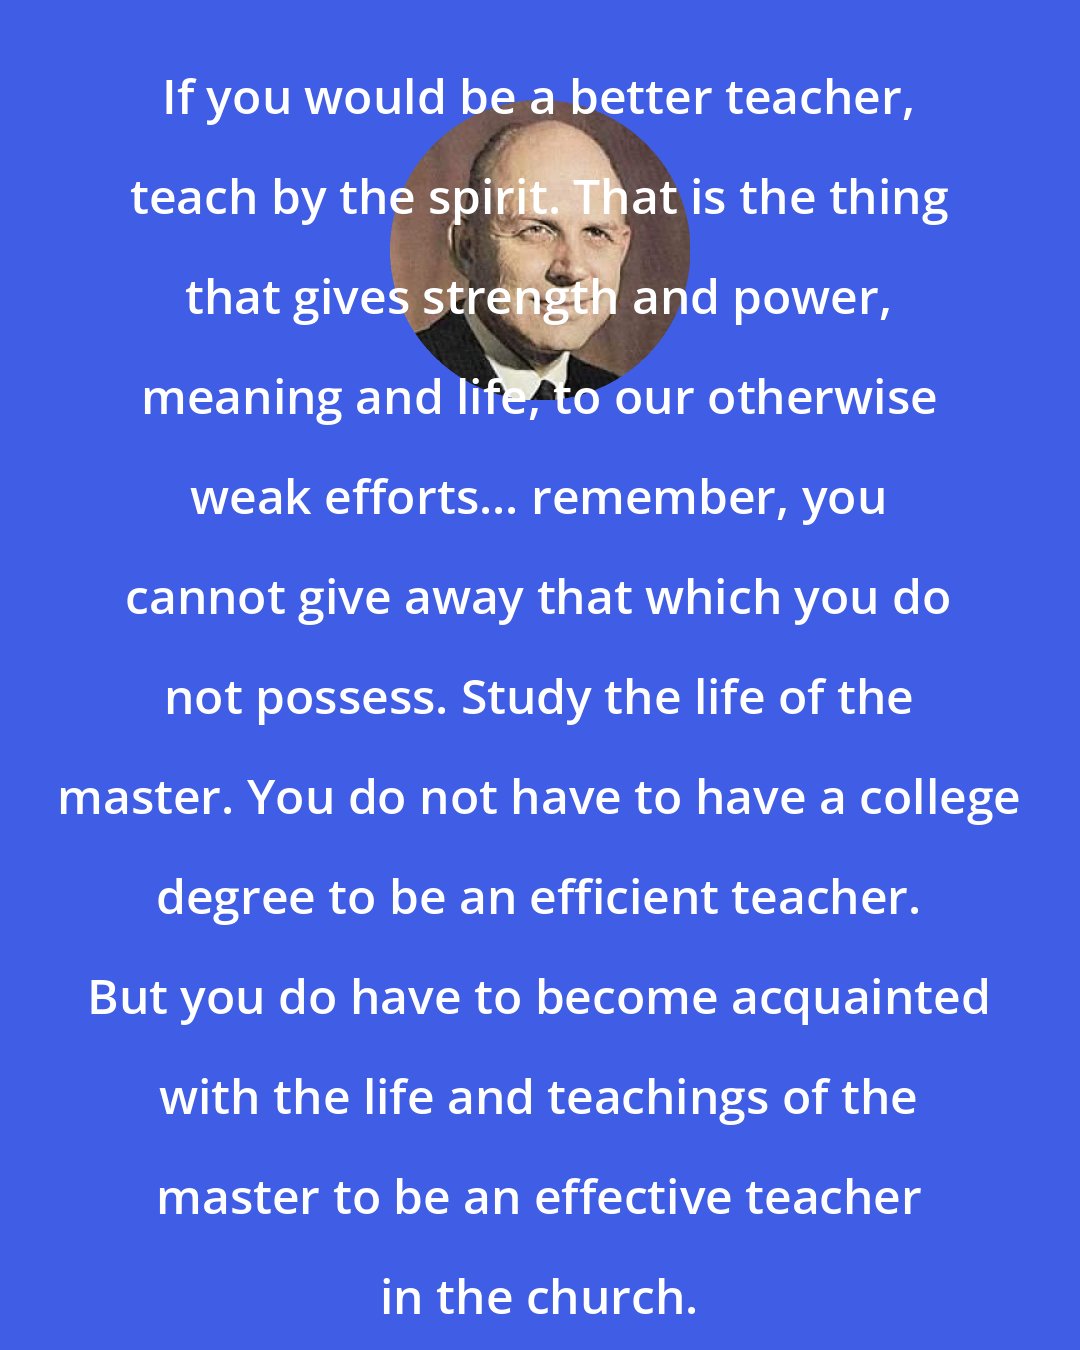 A. Theodore Tuttle: If you would be a better teacher, teach by the spirit. That is the thing that gives strength and power, meaning and life, to our otherwise weak efforts... remember, you cannot give away that which you do not possess. Study the life of the master. You do not have to have a college degree to be an efficient teacher. But you do have to become acquainted with the life and teachings of the master to be an effective teacher in the church.